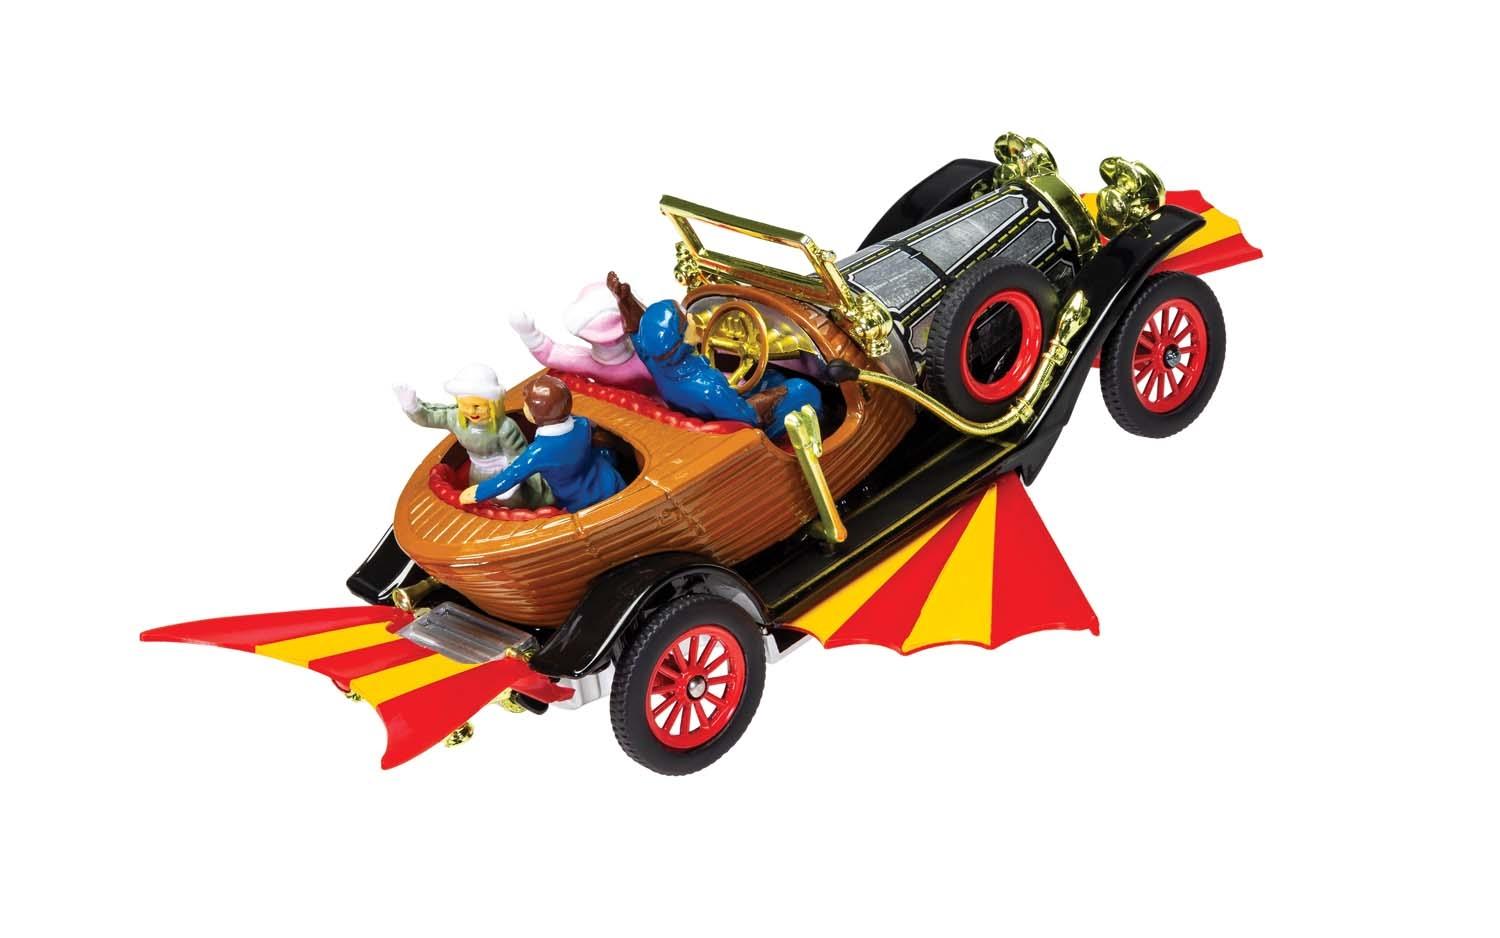 The car has all the four characters from the original November 1968 release.  The model is presented in Chitty Chitty Bang Bang themed box packaging